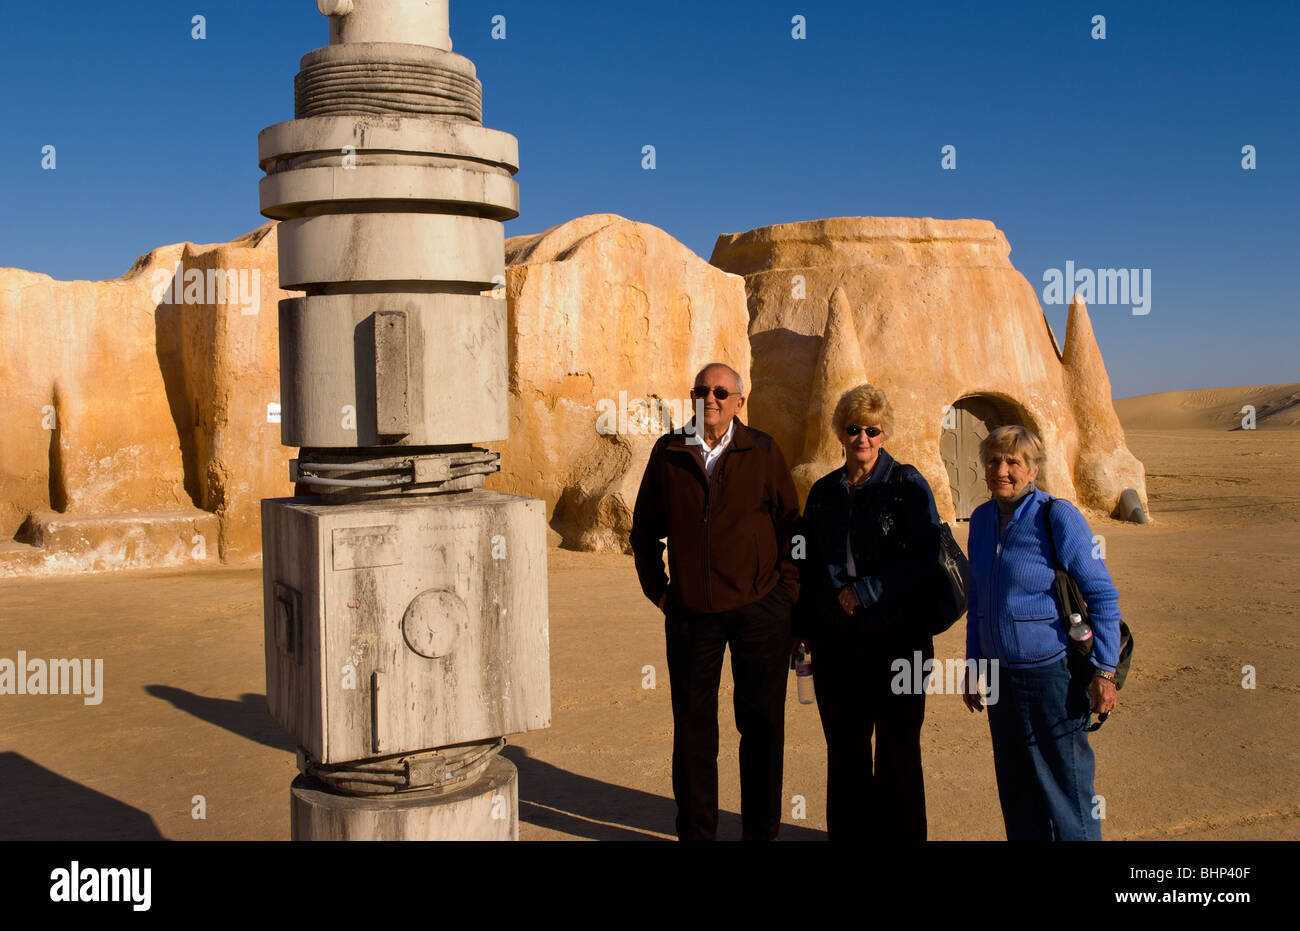 Tourists at famous movie set of Star Wars movies in Sahara Desert near Tozeur Tunisia Africa Stock Photo